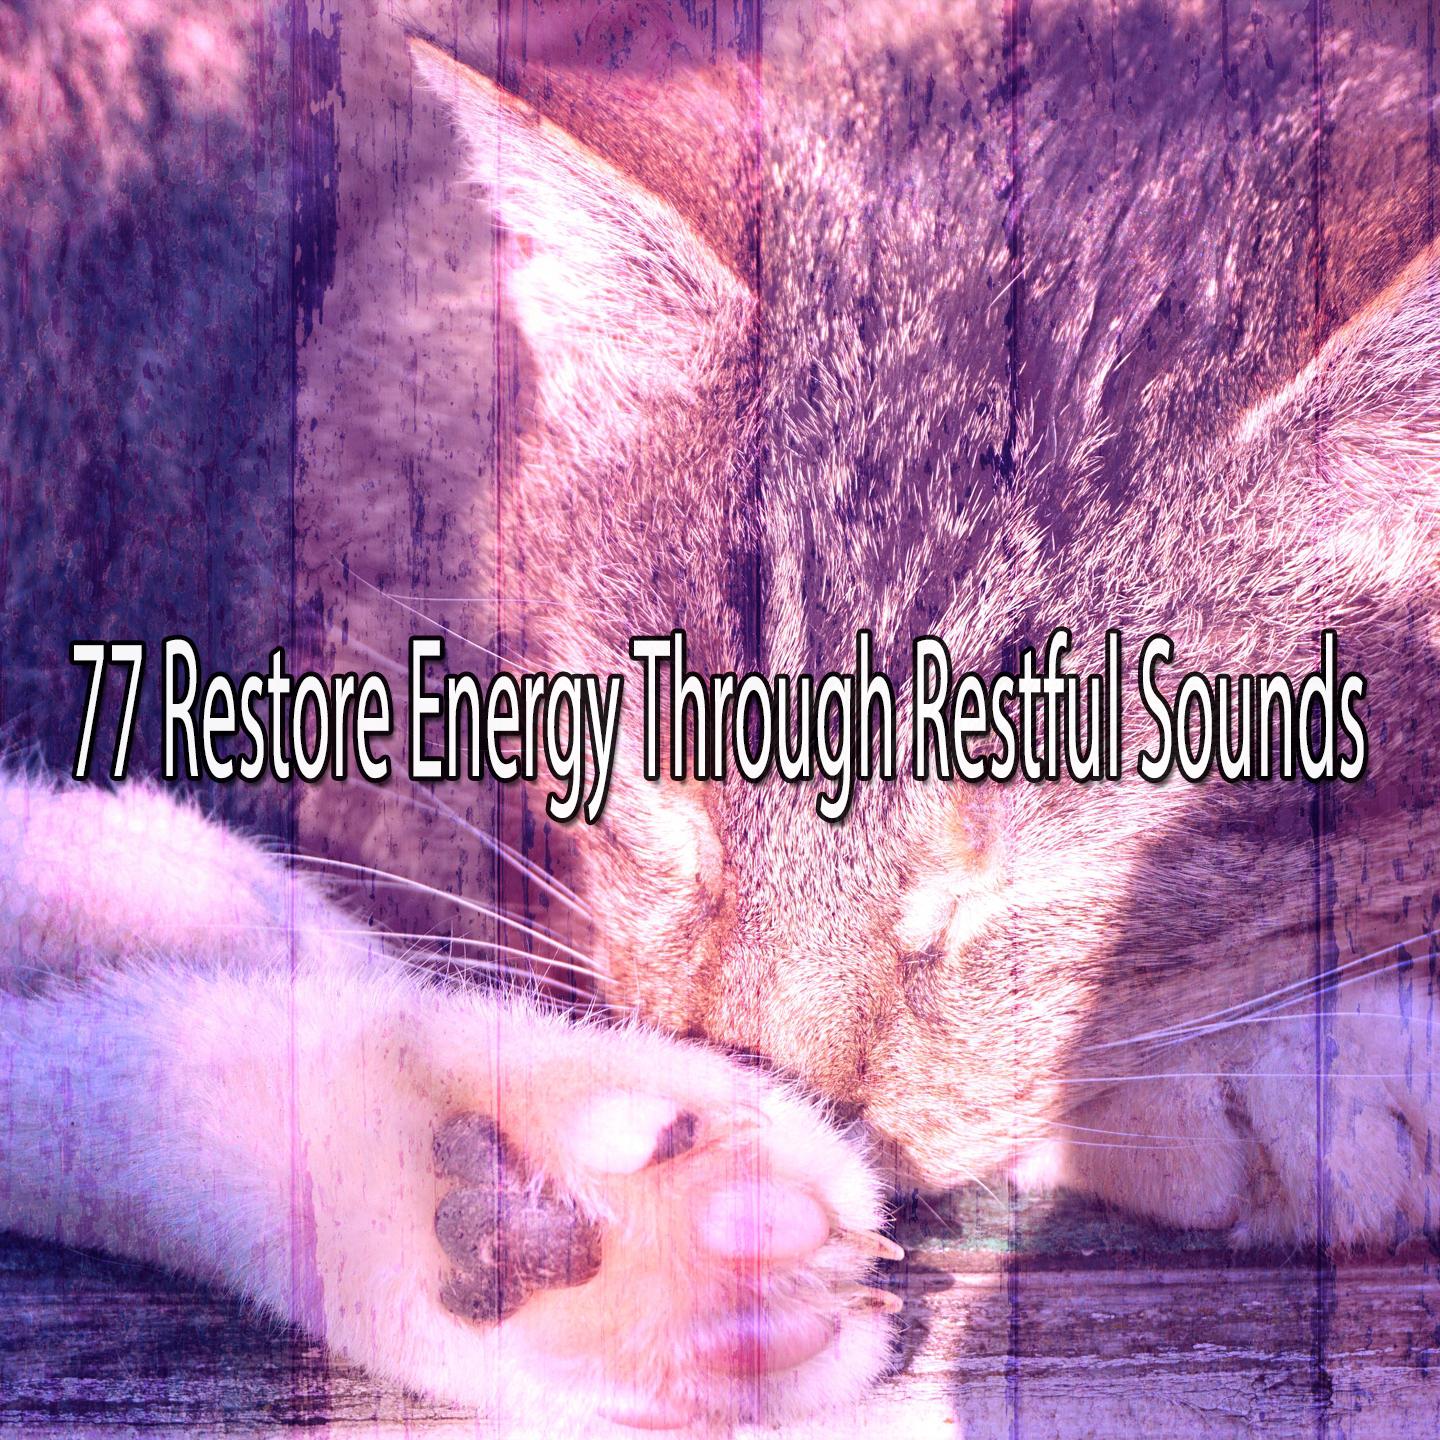 77 Restore Energy Through Restful Sounds